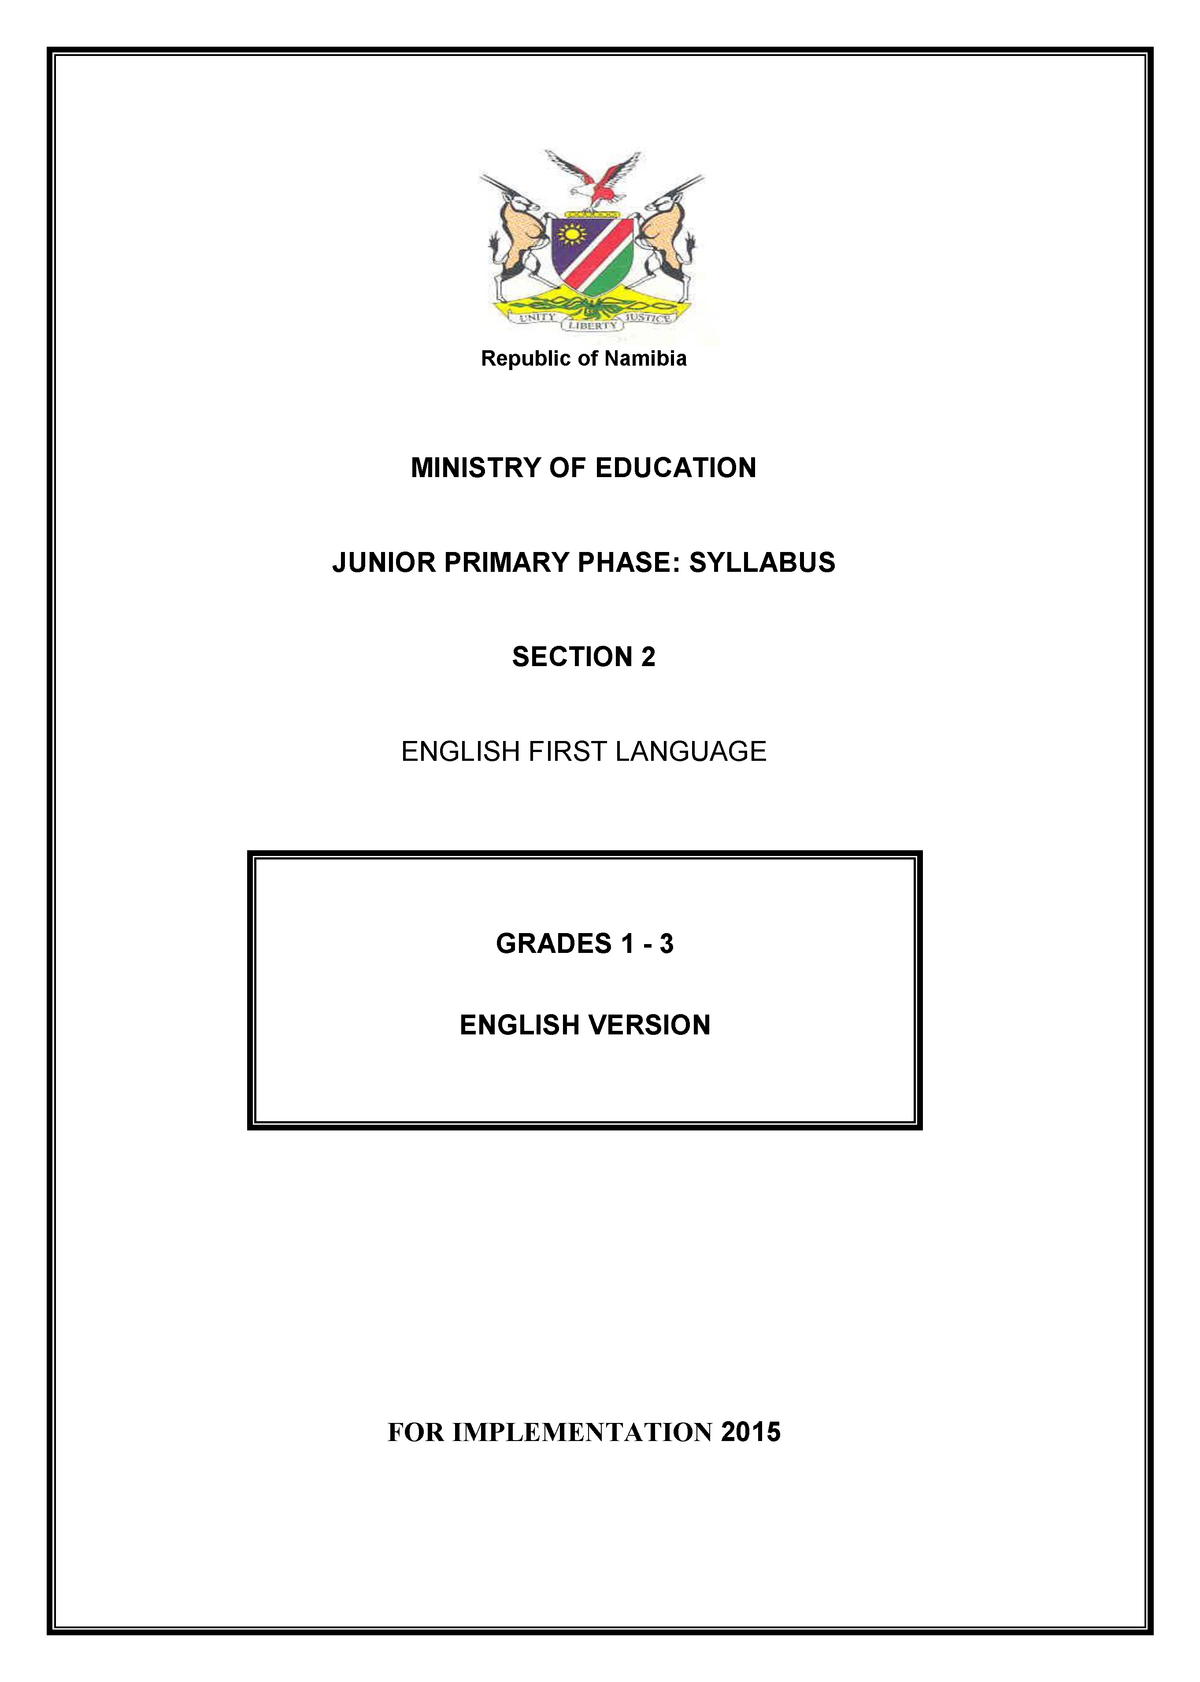 jp-syllabuses-section-2-fl-english-mar-republic-of-namibia-ministry